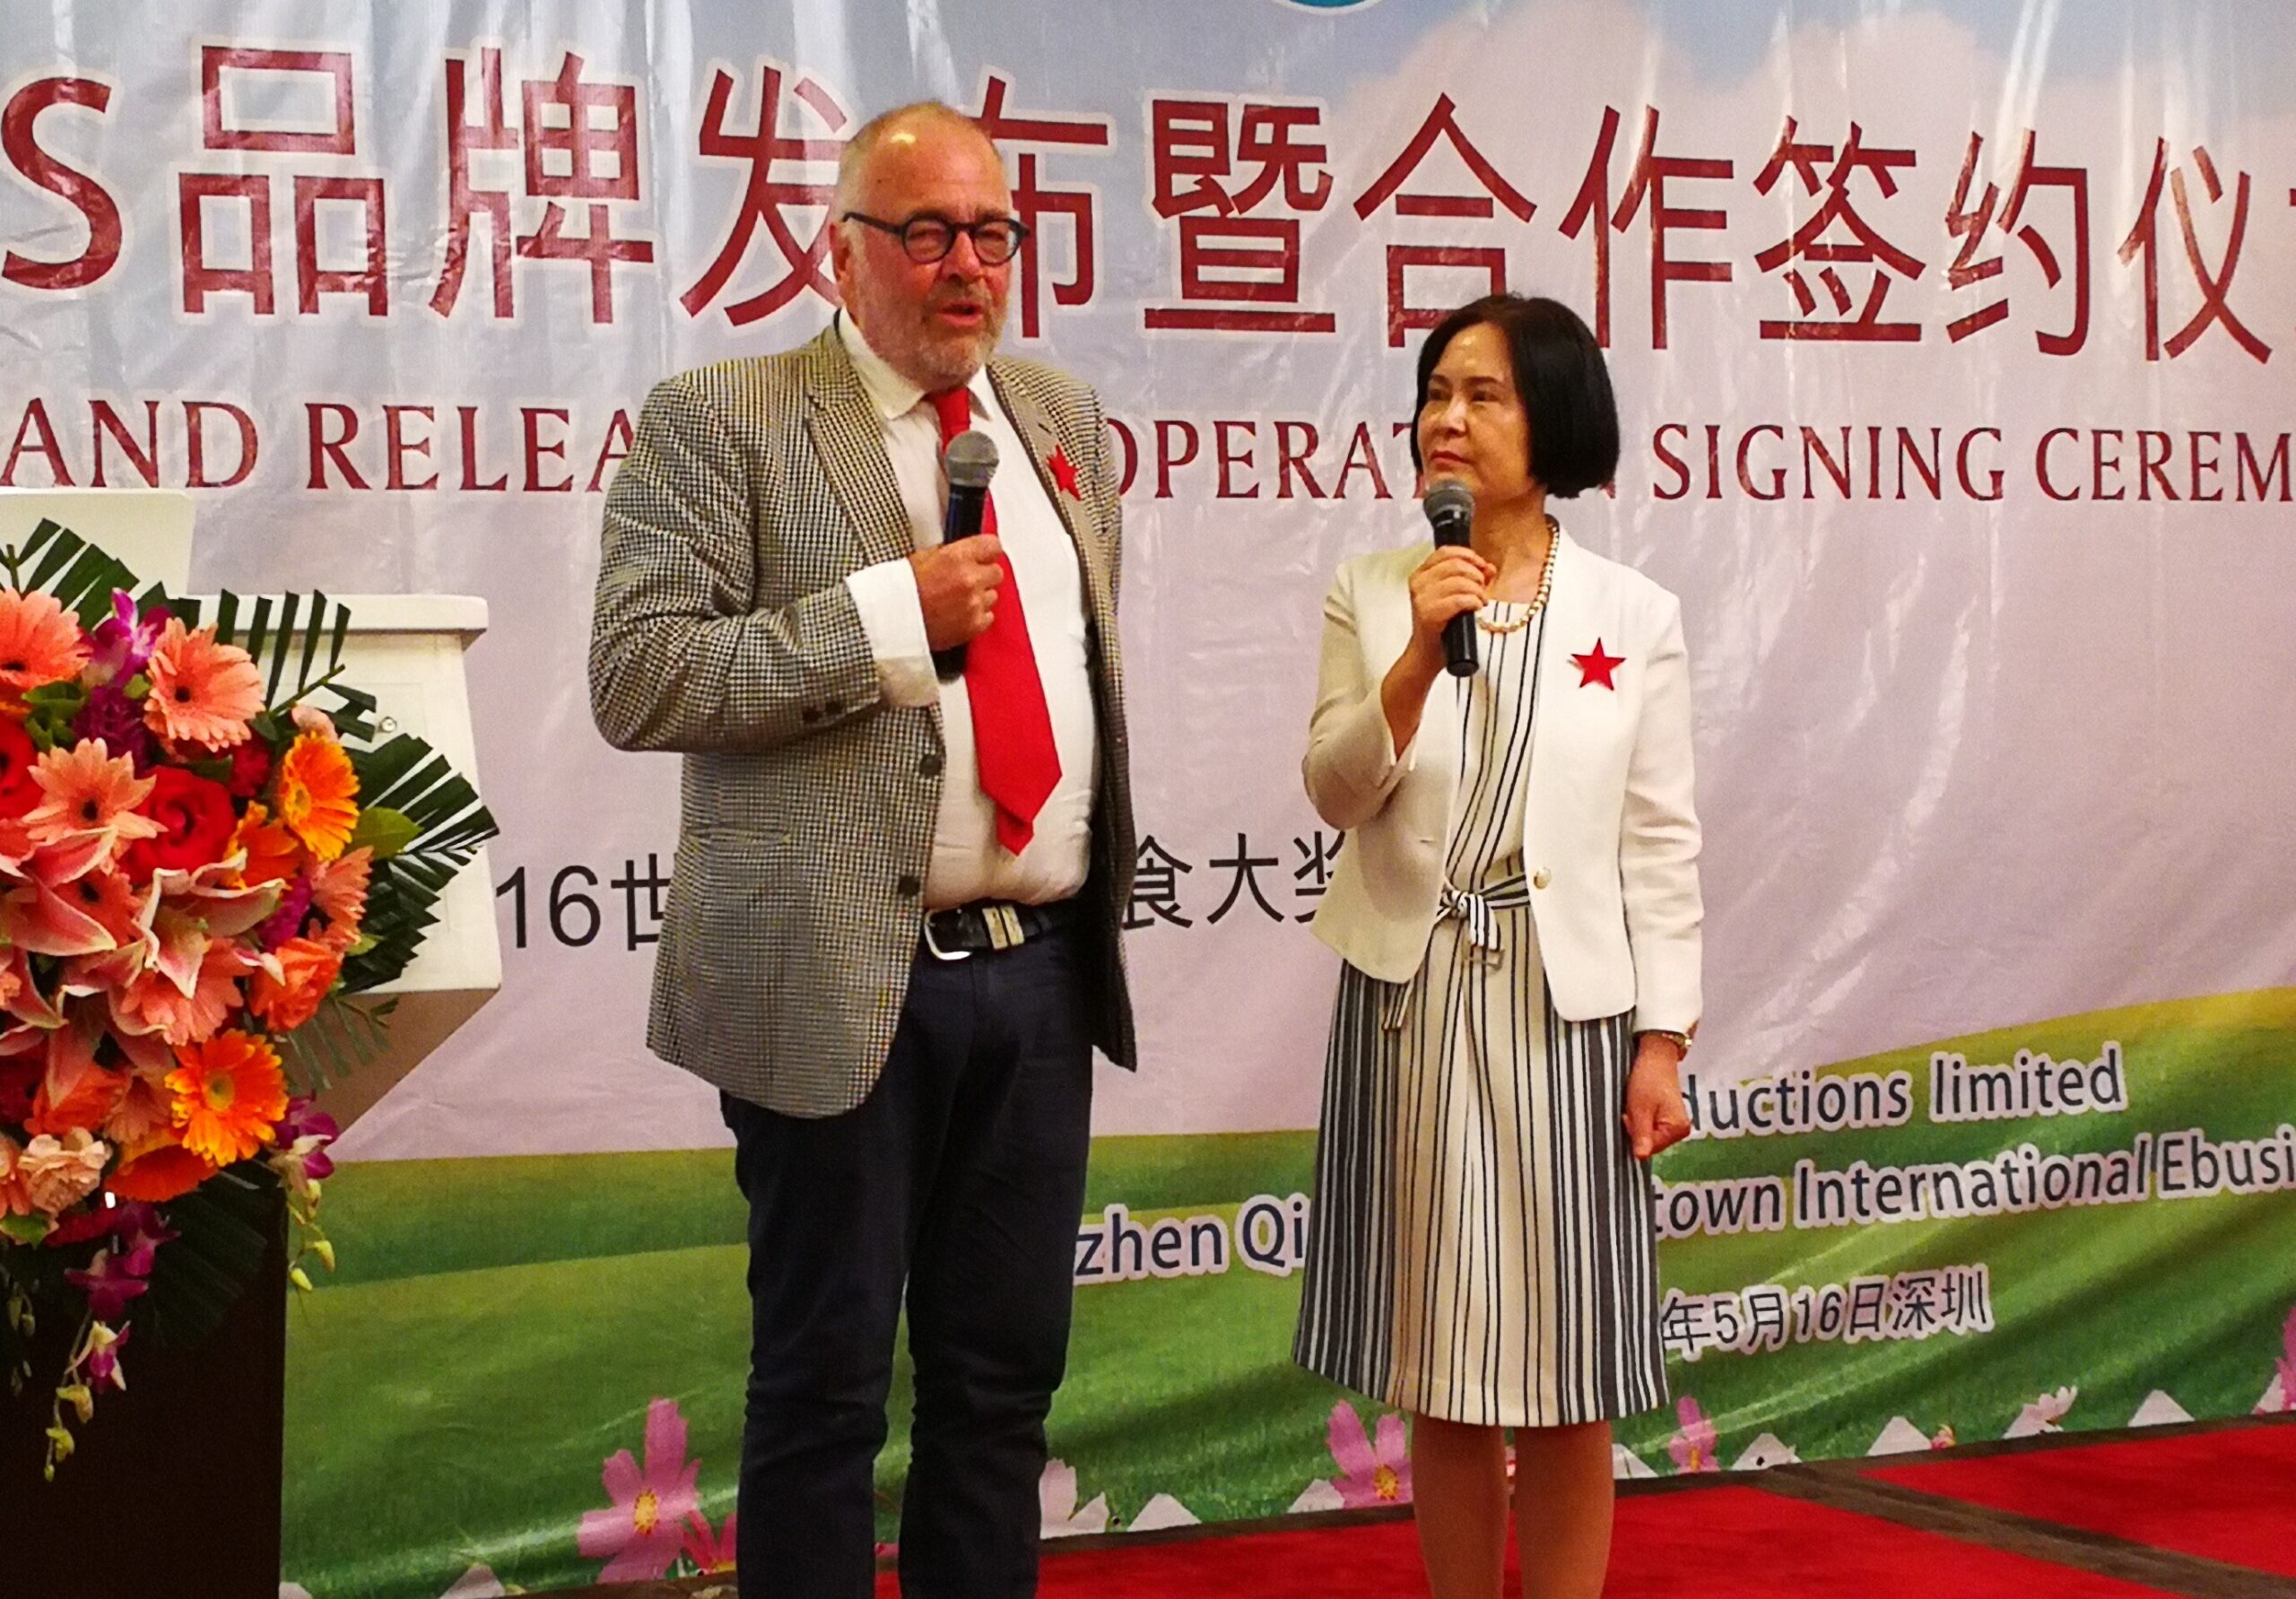 Pic's Peanut Butter owner Pic Picot and Ebaytown director Catherine Wang at the signing ceremony in Schezhen, China (2)